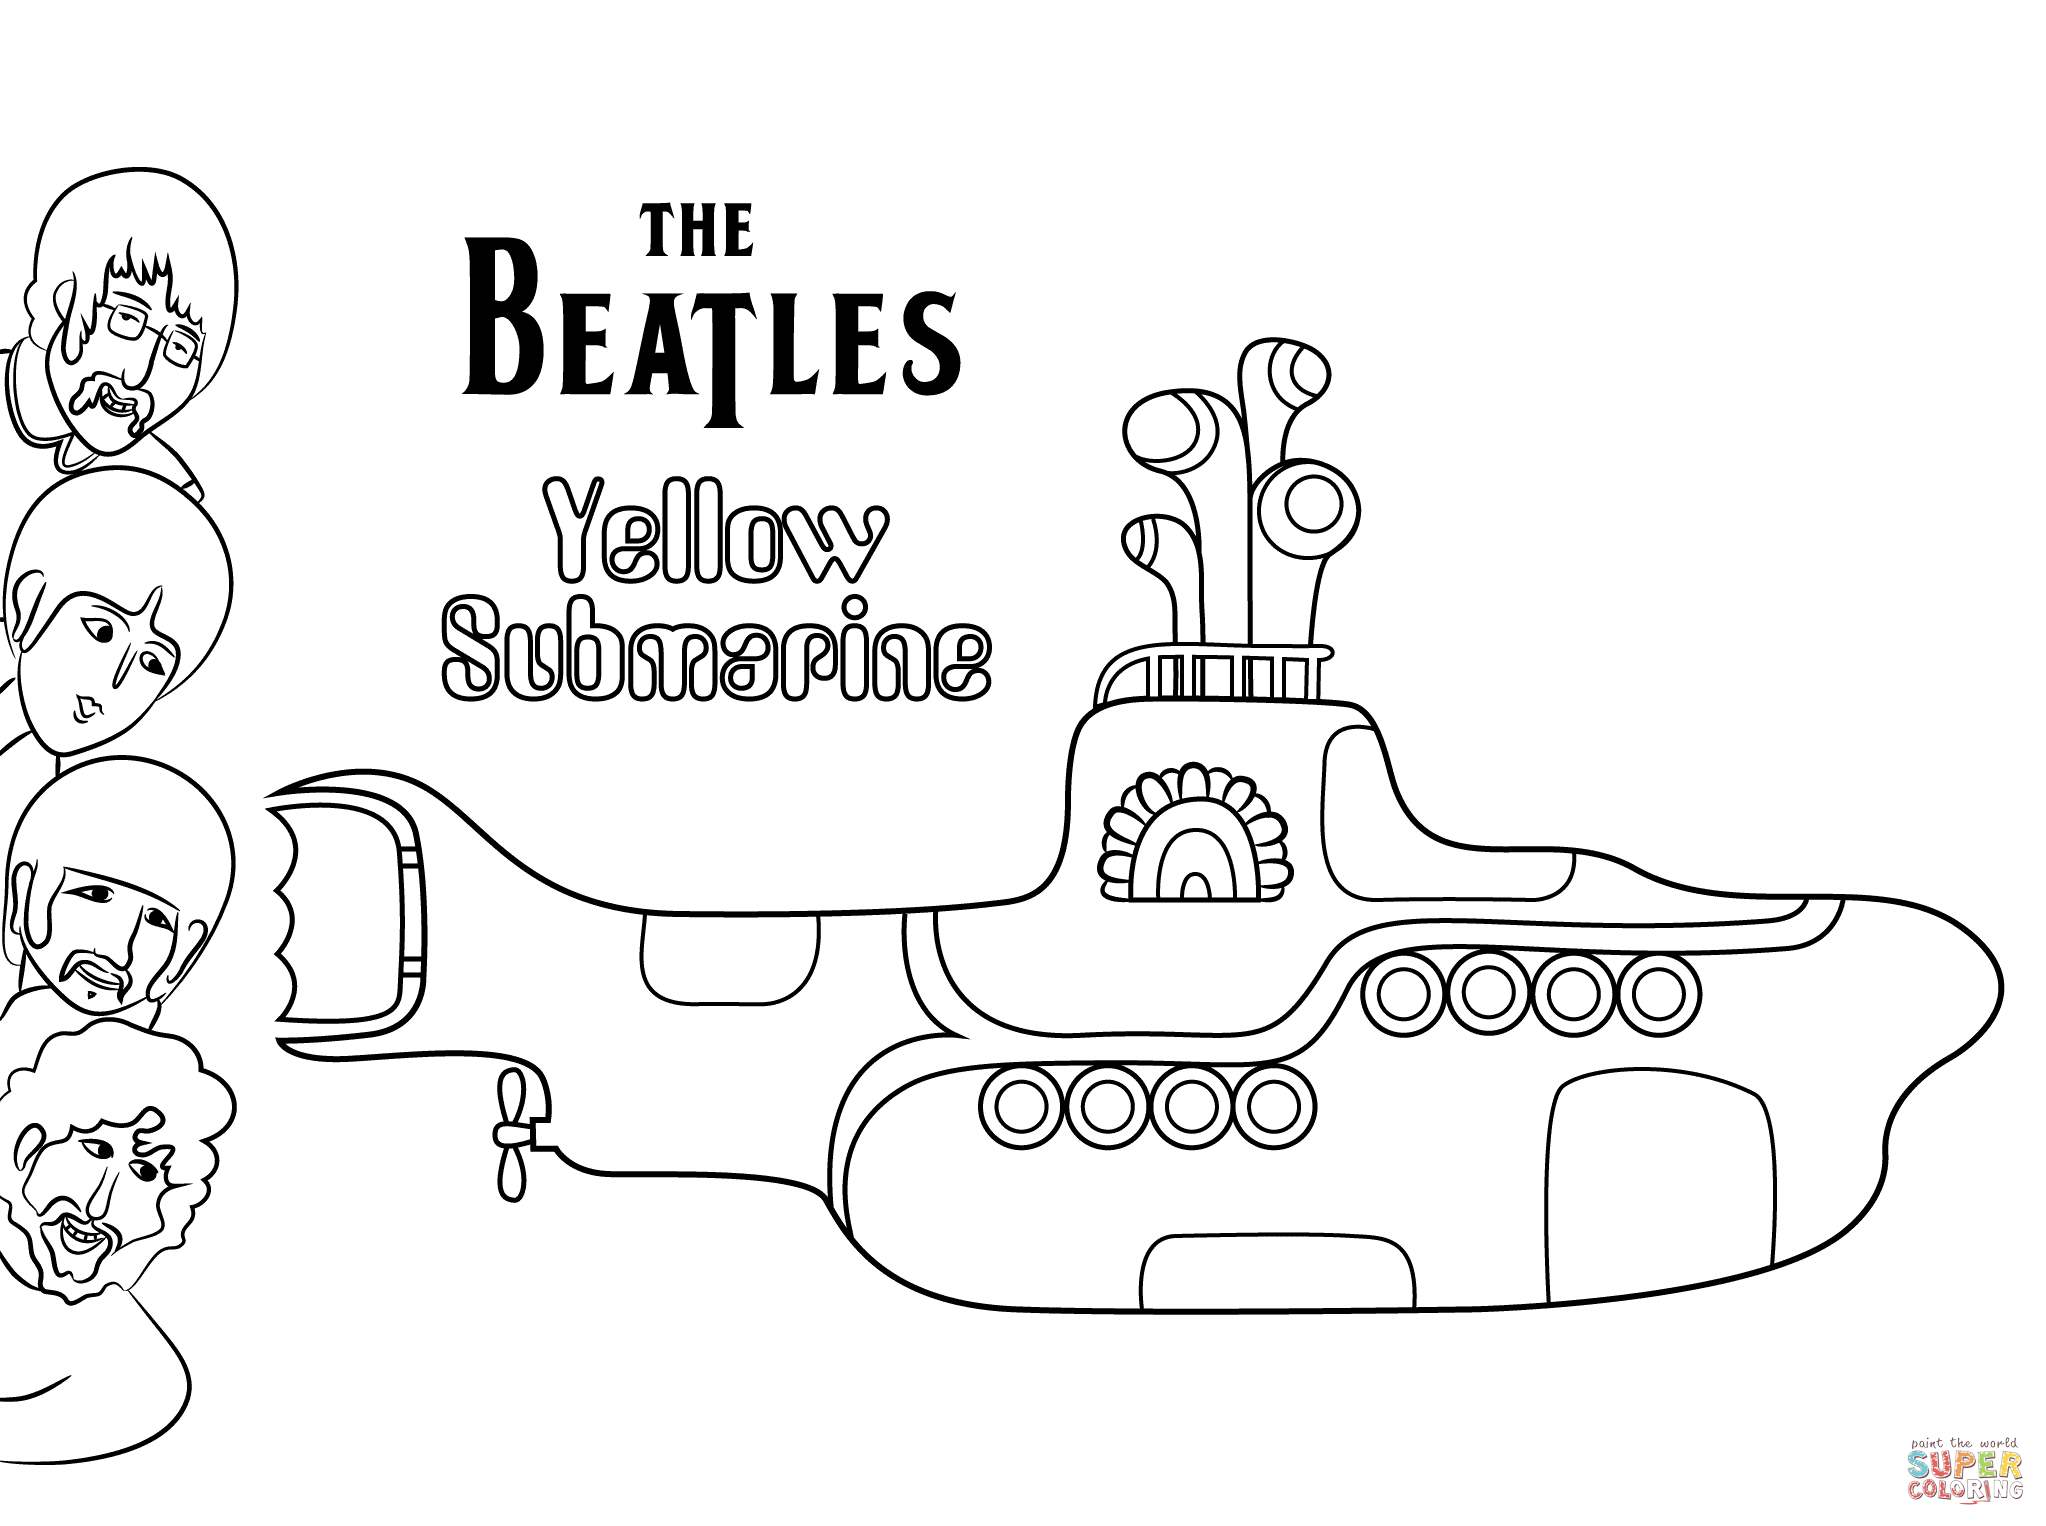 The beatles yellow submarine cover art coloring page free printable coloring pages